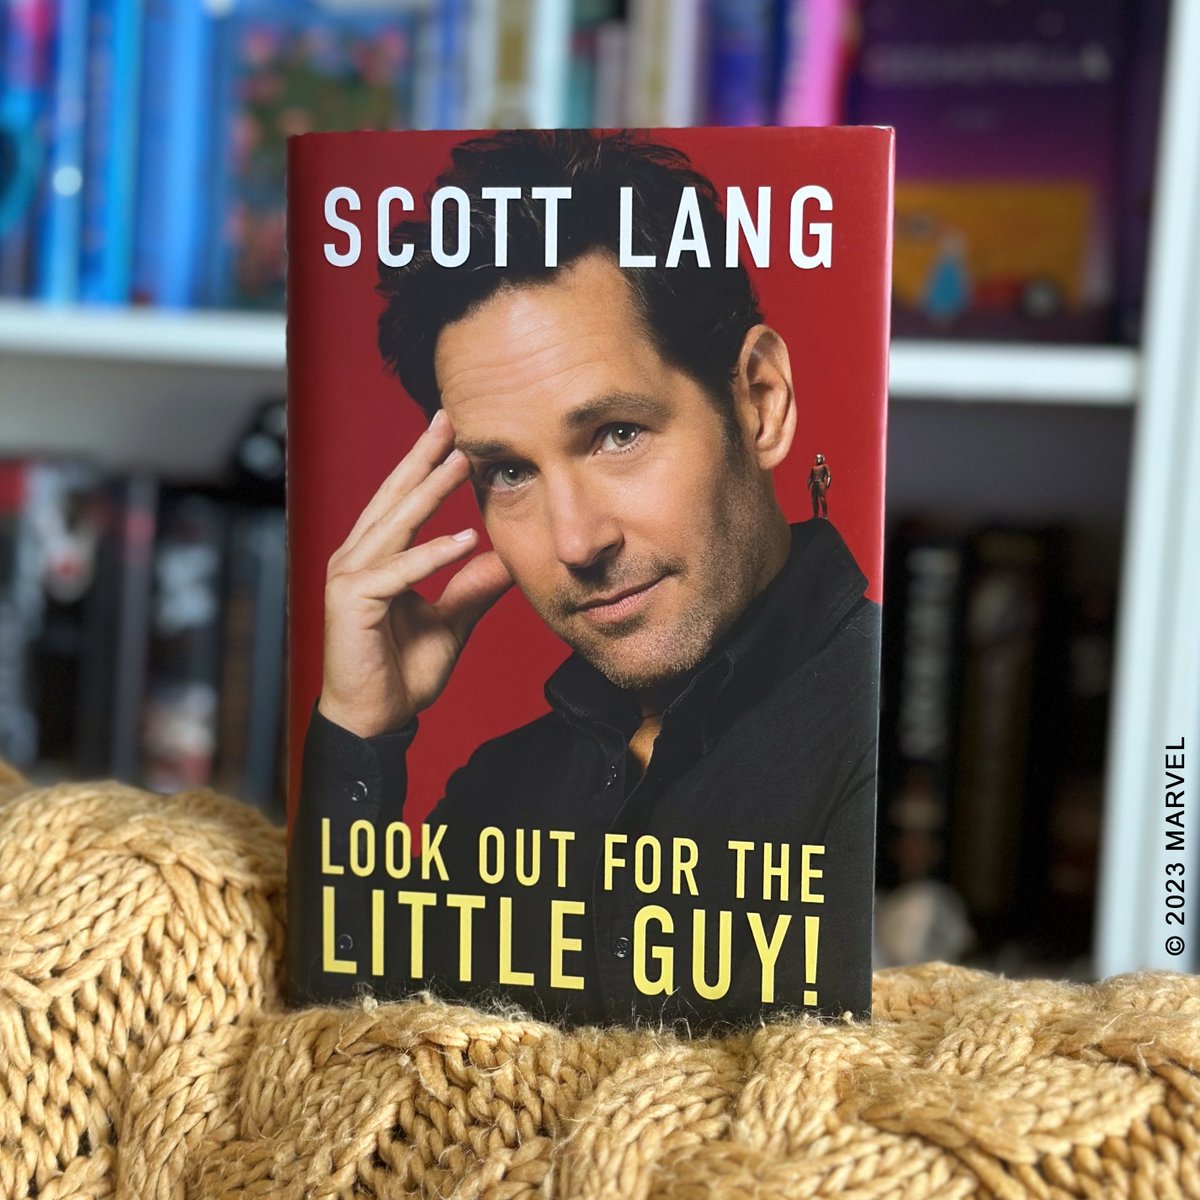 Hero. Avenger. Father. And now, published author. Scott Lang’s memoir, Look Out for the Little Guy, is available now: di.sn/60063gGGu